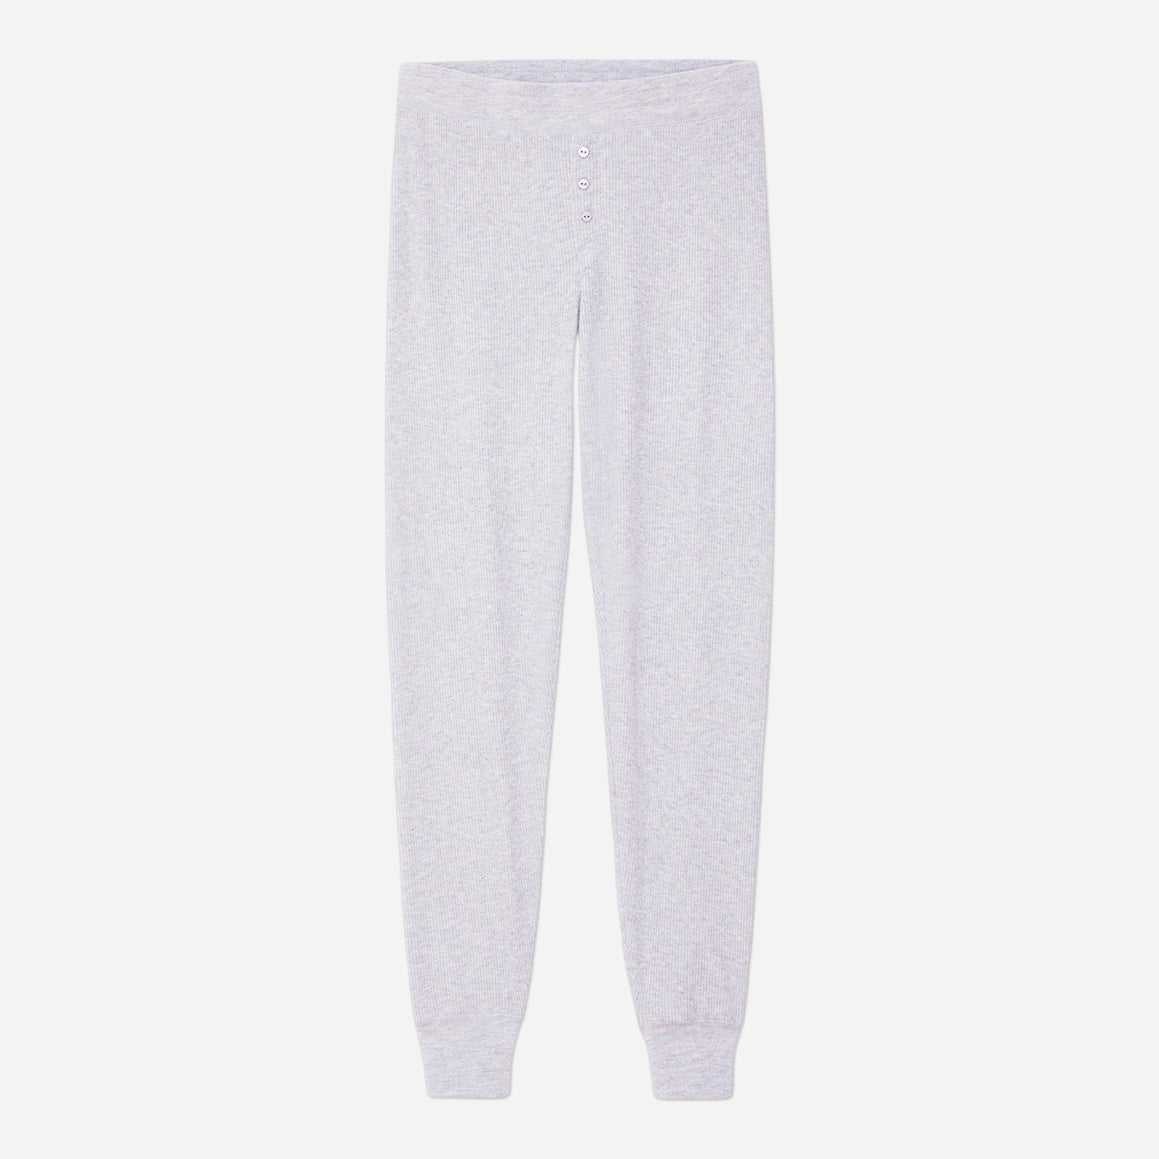 These cozy joggers pants feature a cozy fit and an elastic waistband to provide a customized and secure fit. Detailed with a cute faux-button fly and ribbed ankle cuffs, these stylish lounge pants are a wind-down must have.